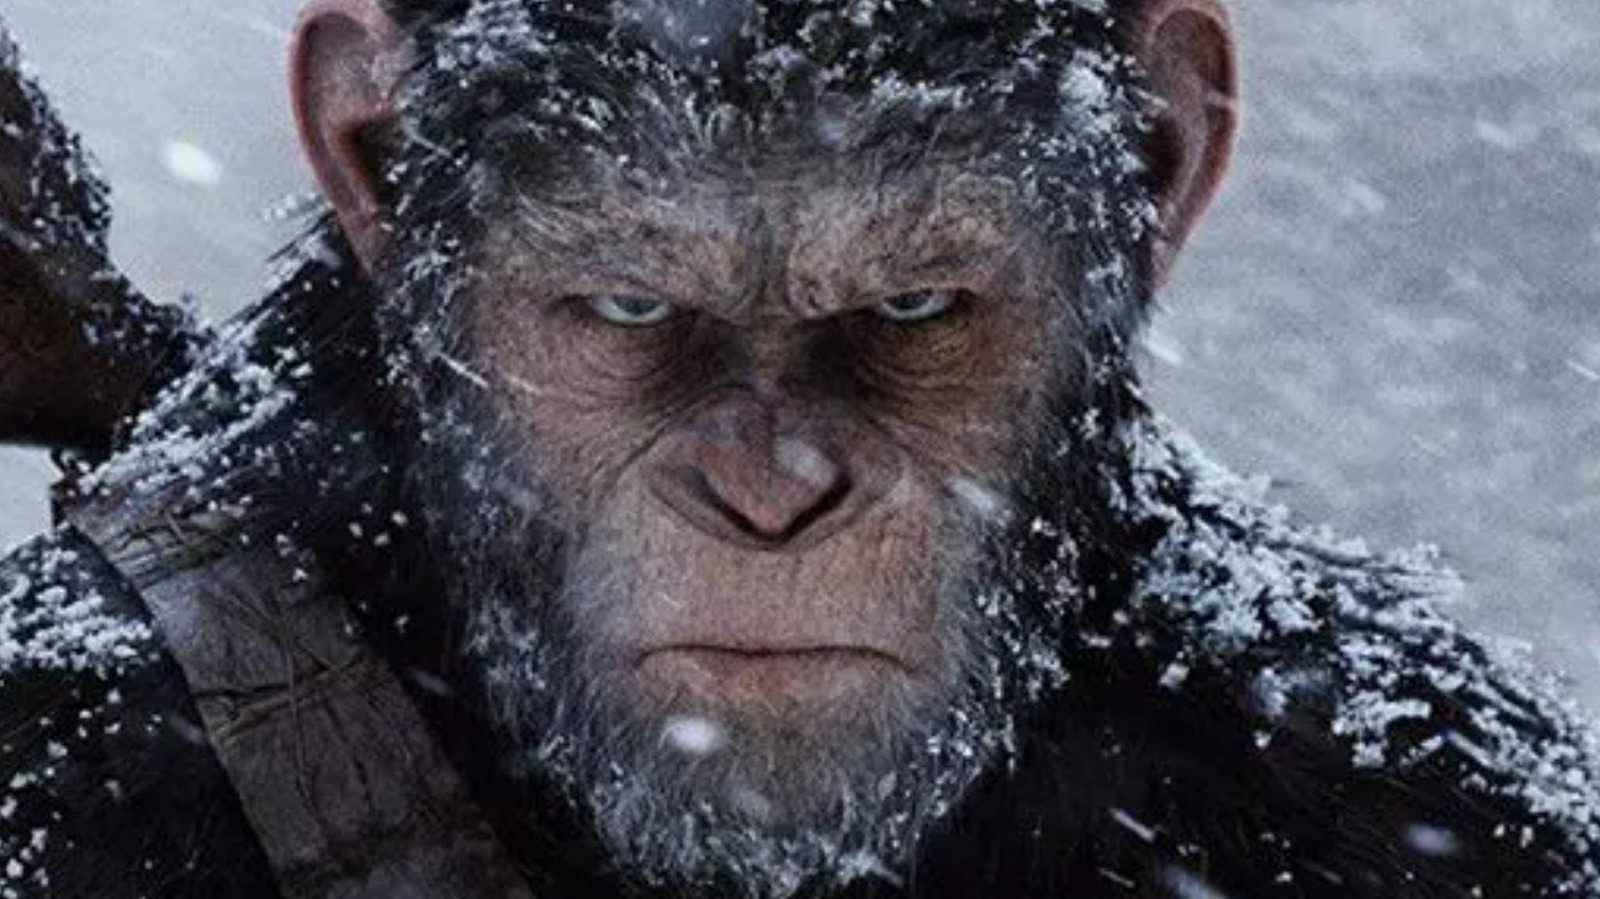 caesar son dawn of the planet of the apes